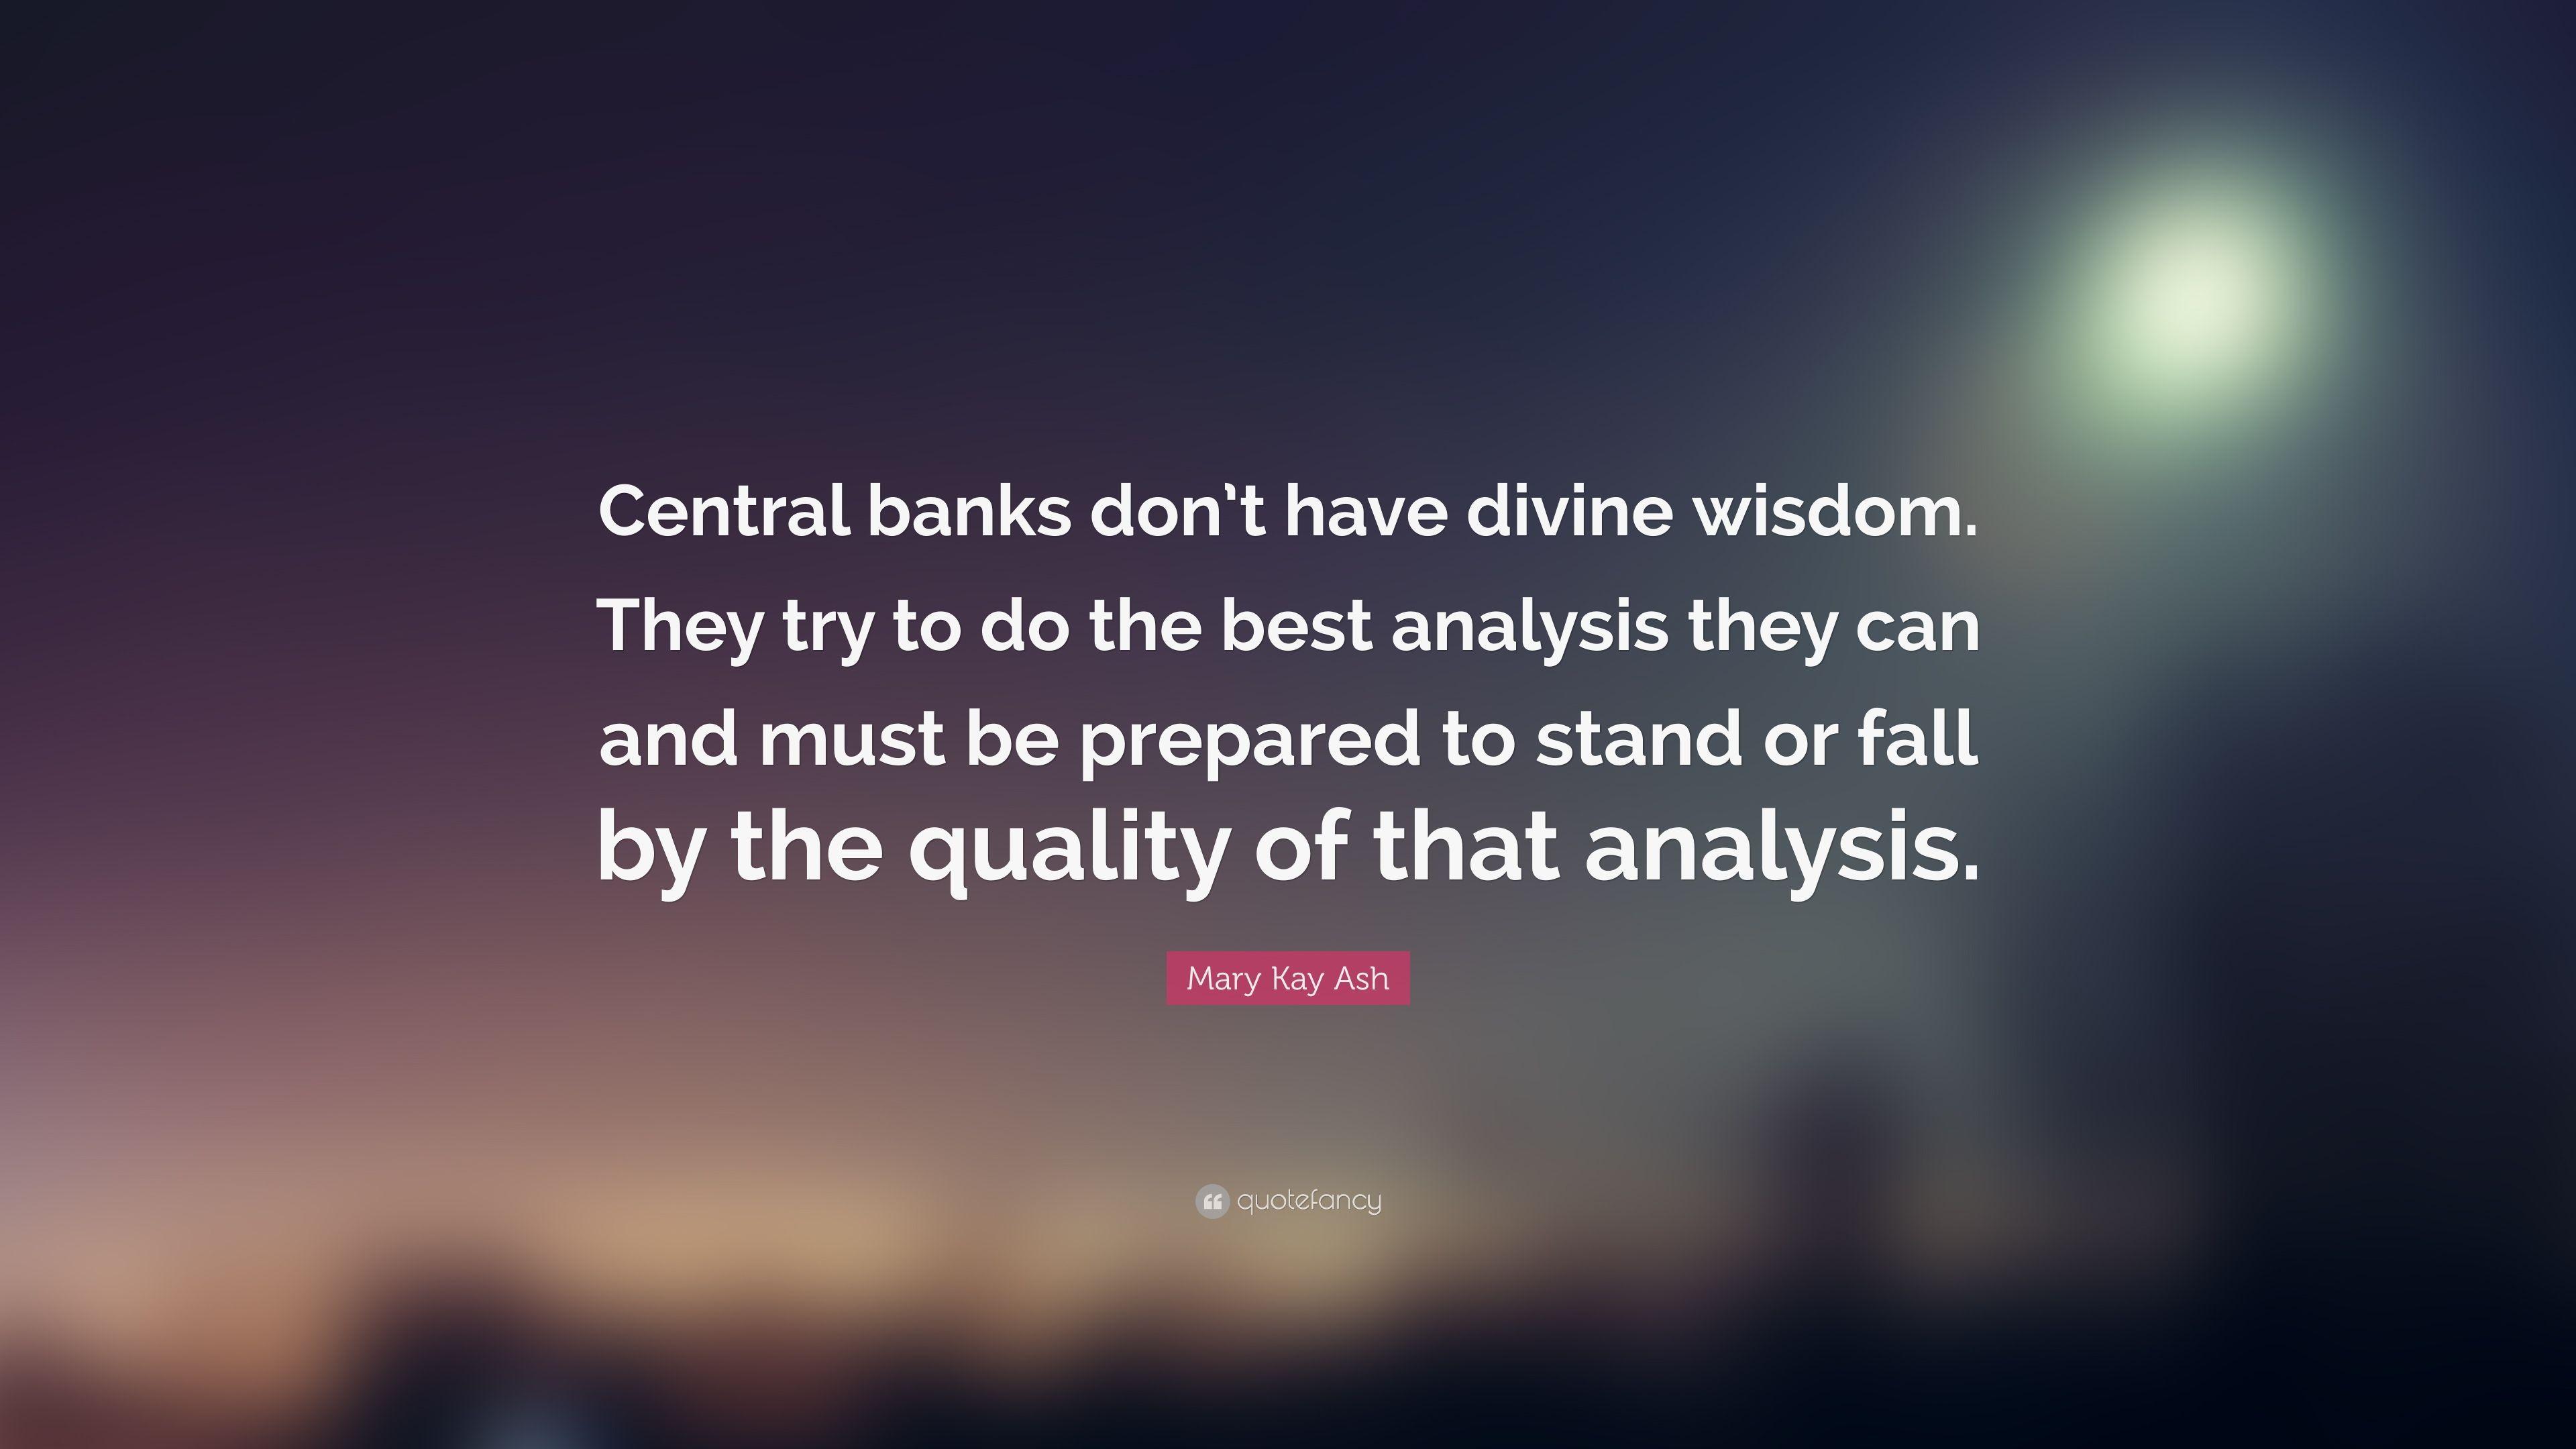 Mary Kay Ash Quote: “Central banks don't have divine wisdom. They